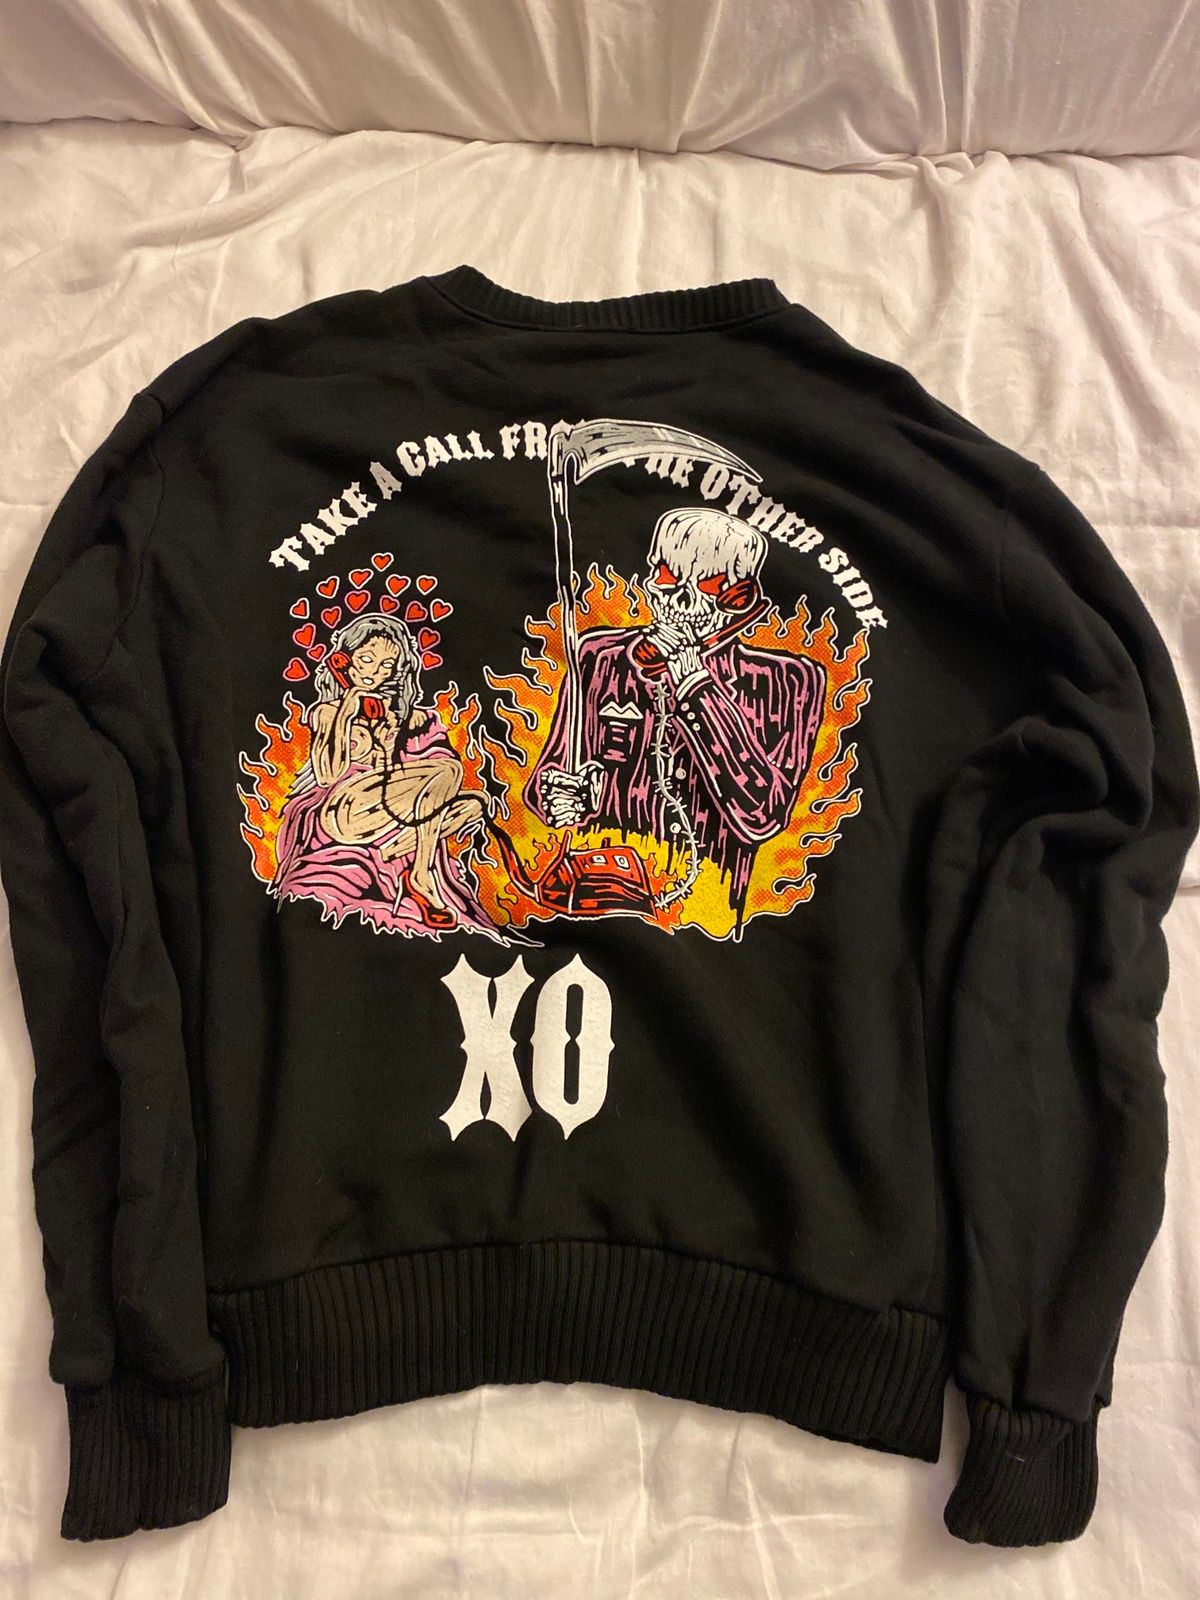 The Weeknd Merchandise on X: XO x Warren Lotas Available Now at